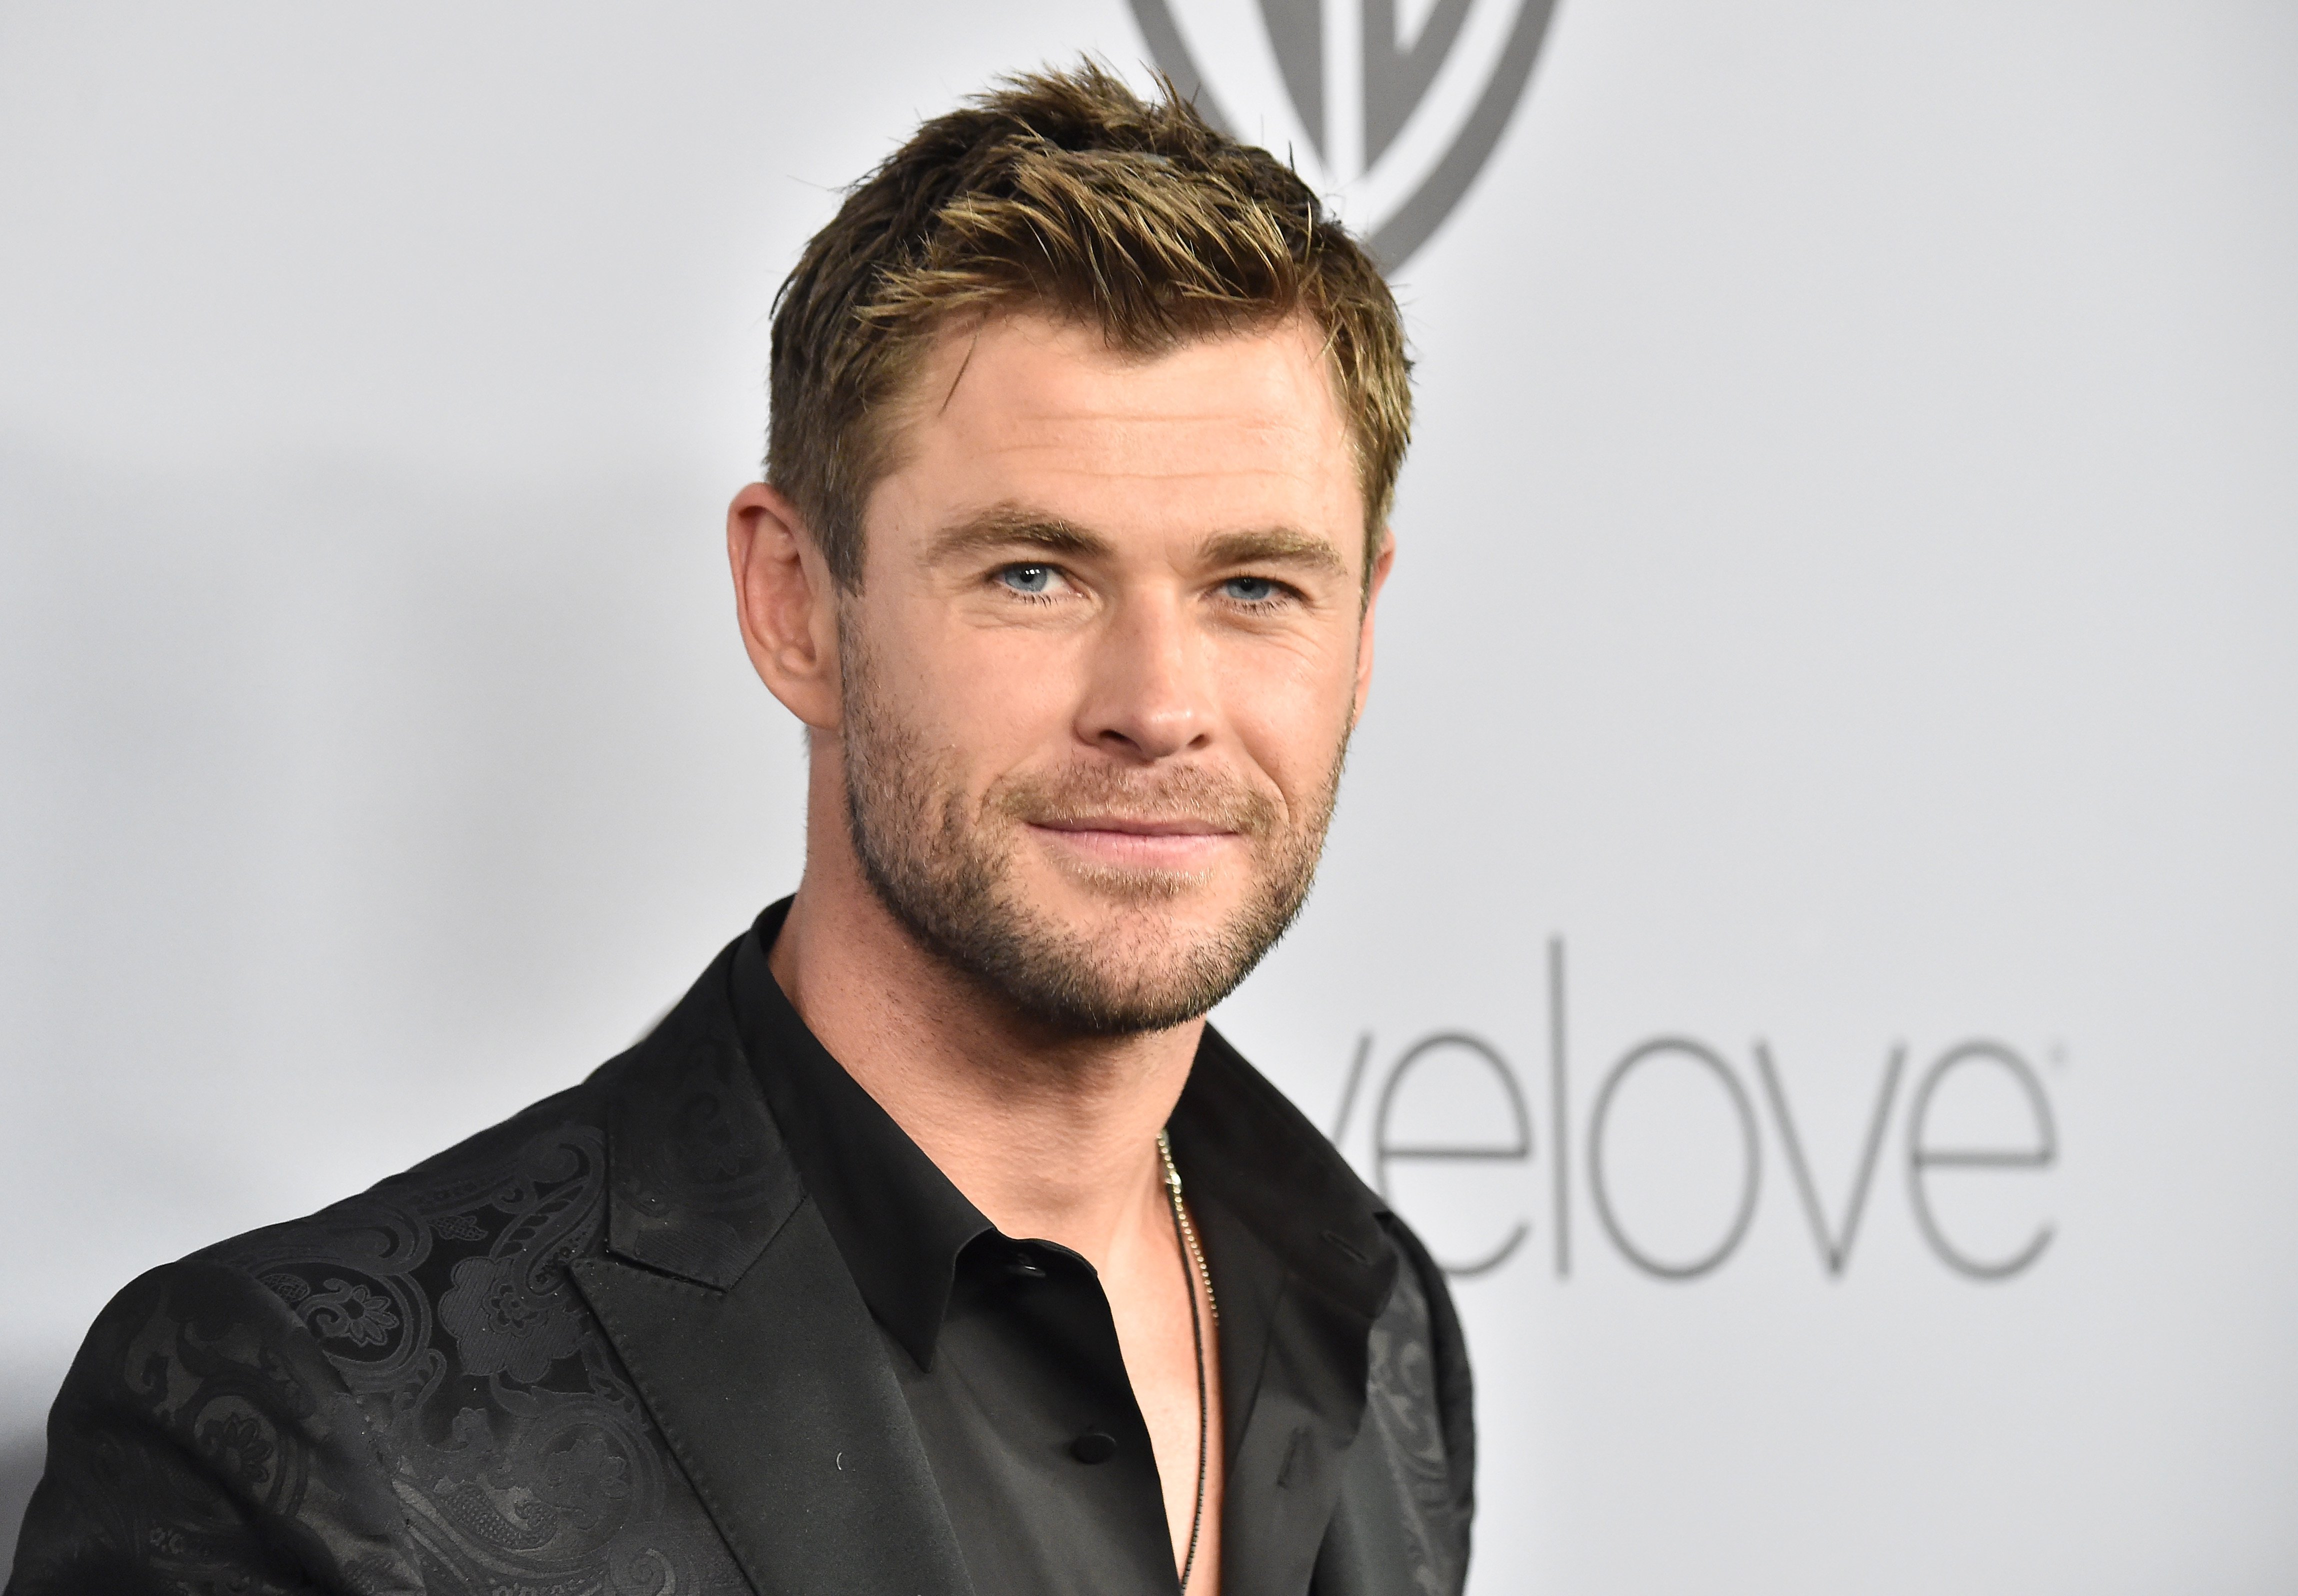 Chris Hemsworth attends 19th Annual Post-Golden Globes Party on January 7, 2018, in Beverly Hills, California. | Source: Getty Images.